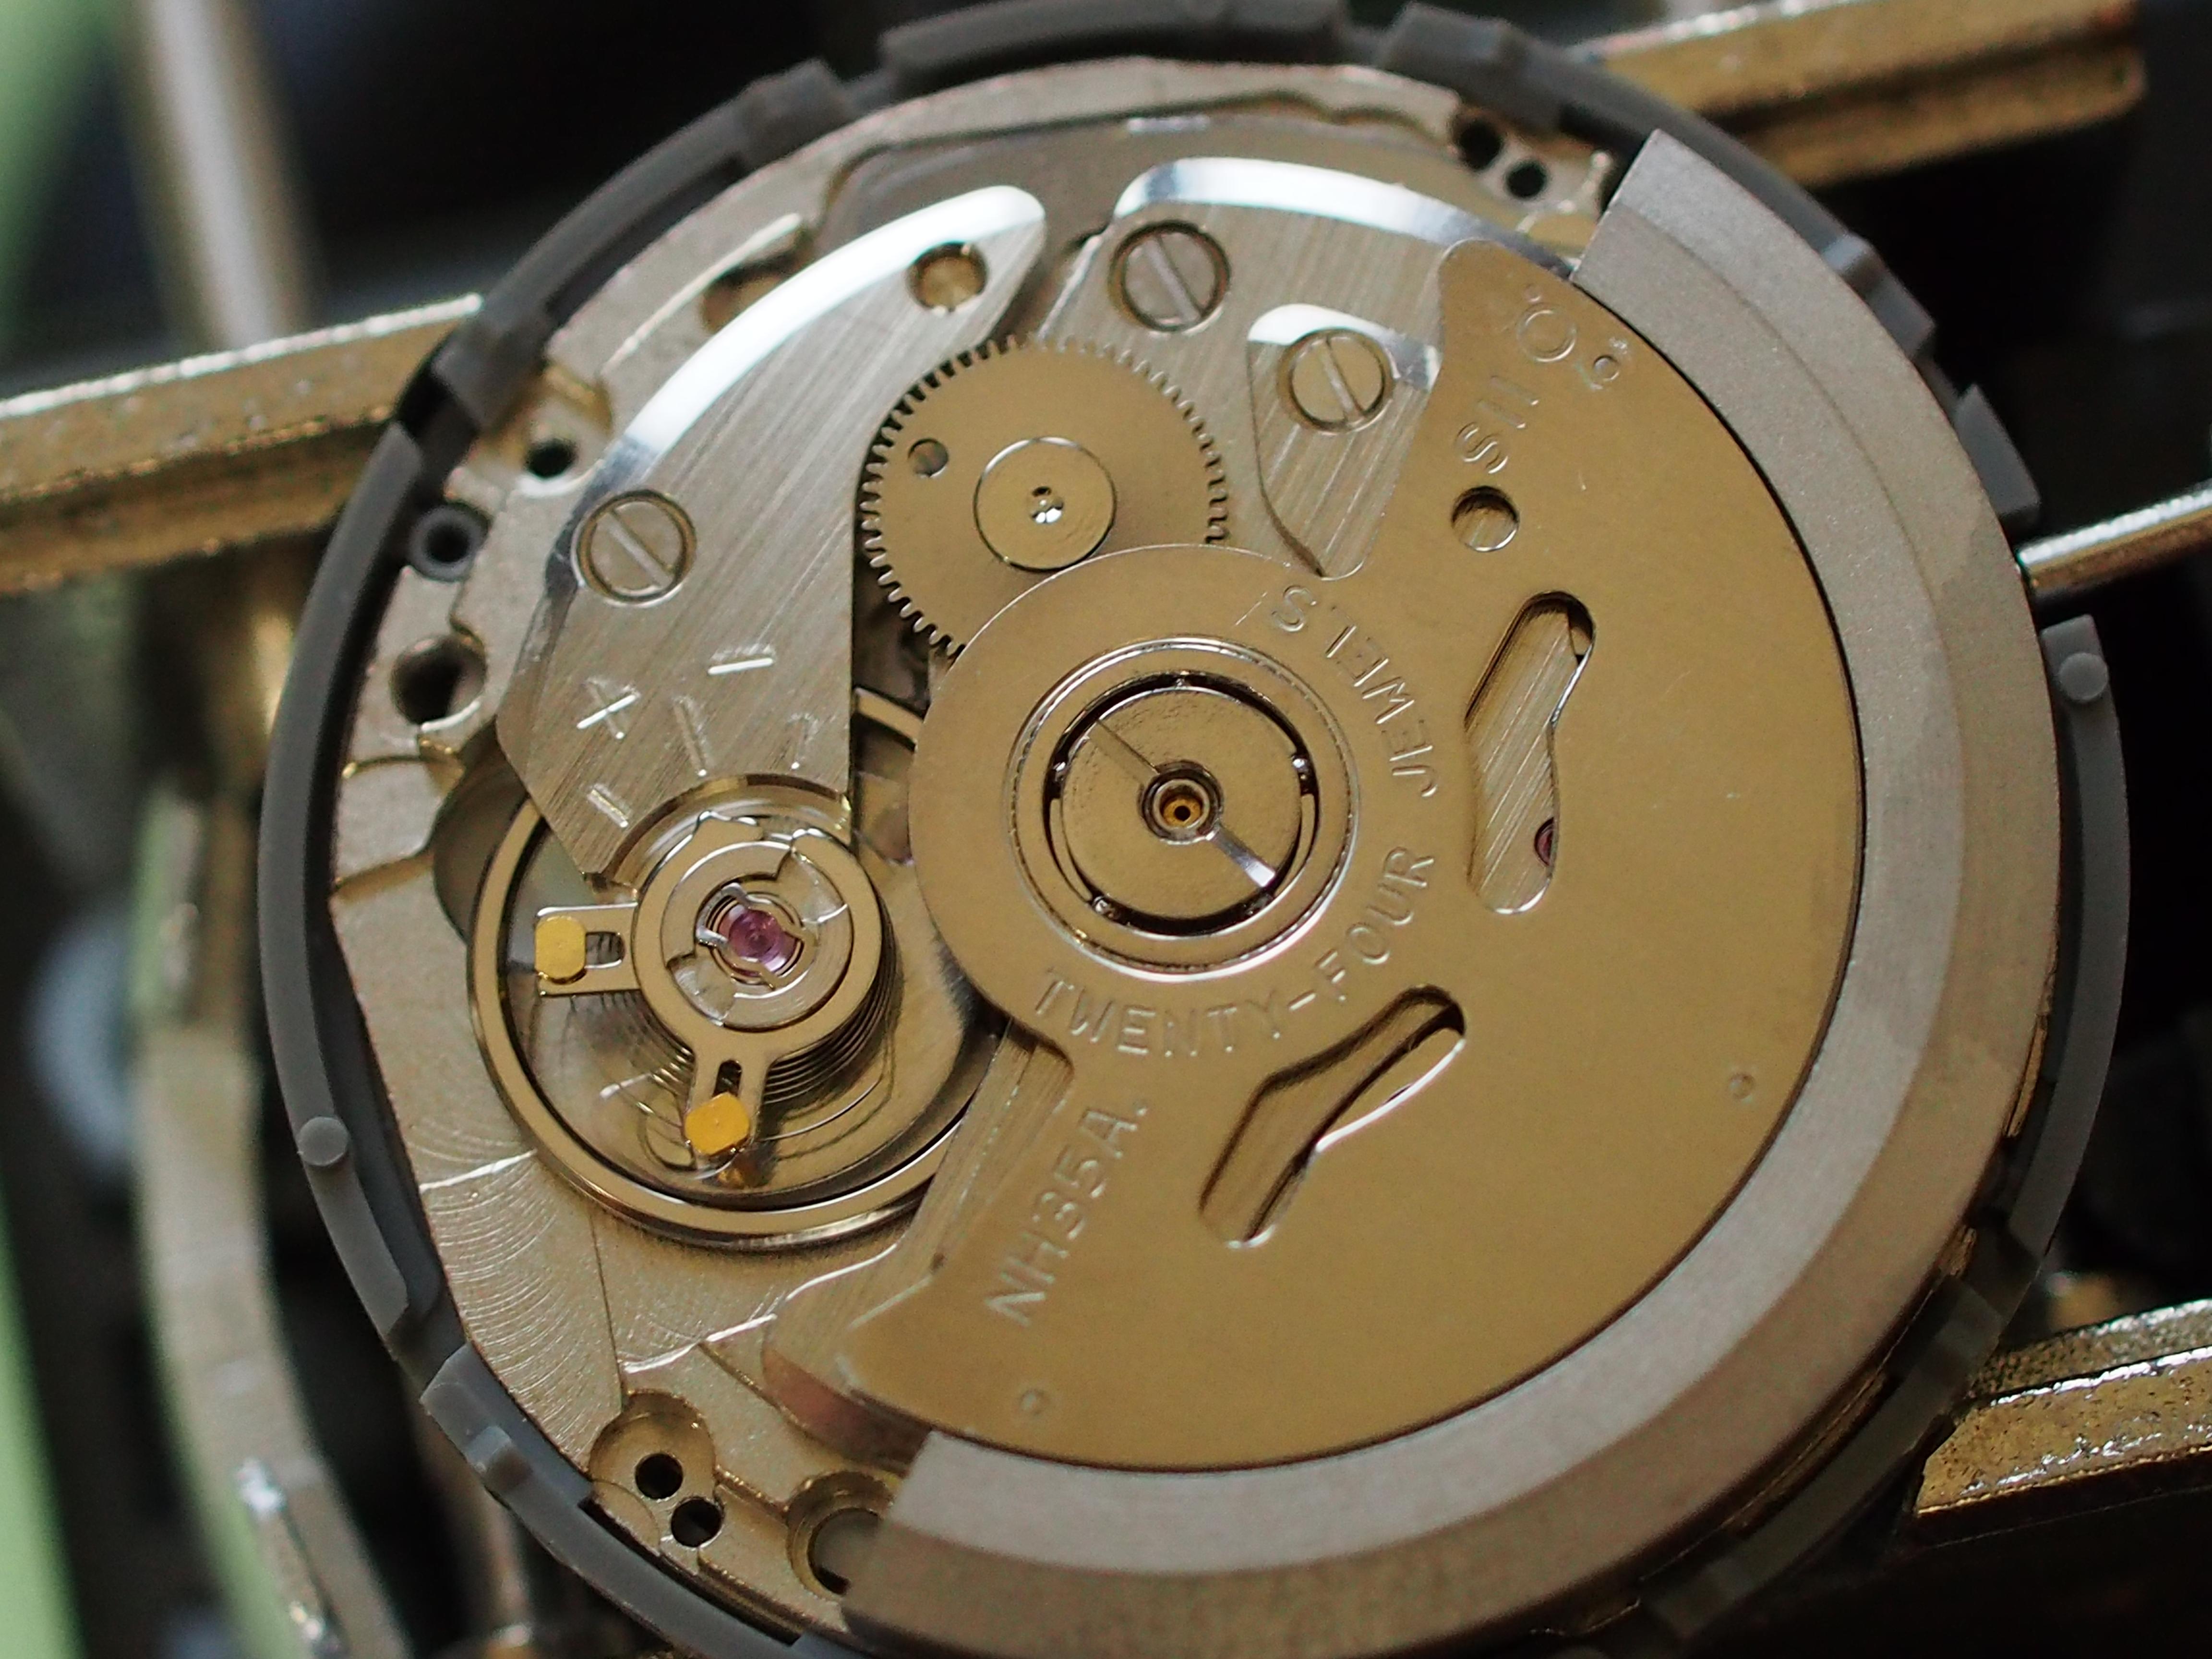 NH35 from China - Chat About Watches & The Industry Here - Watch Repair Talk